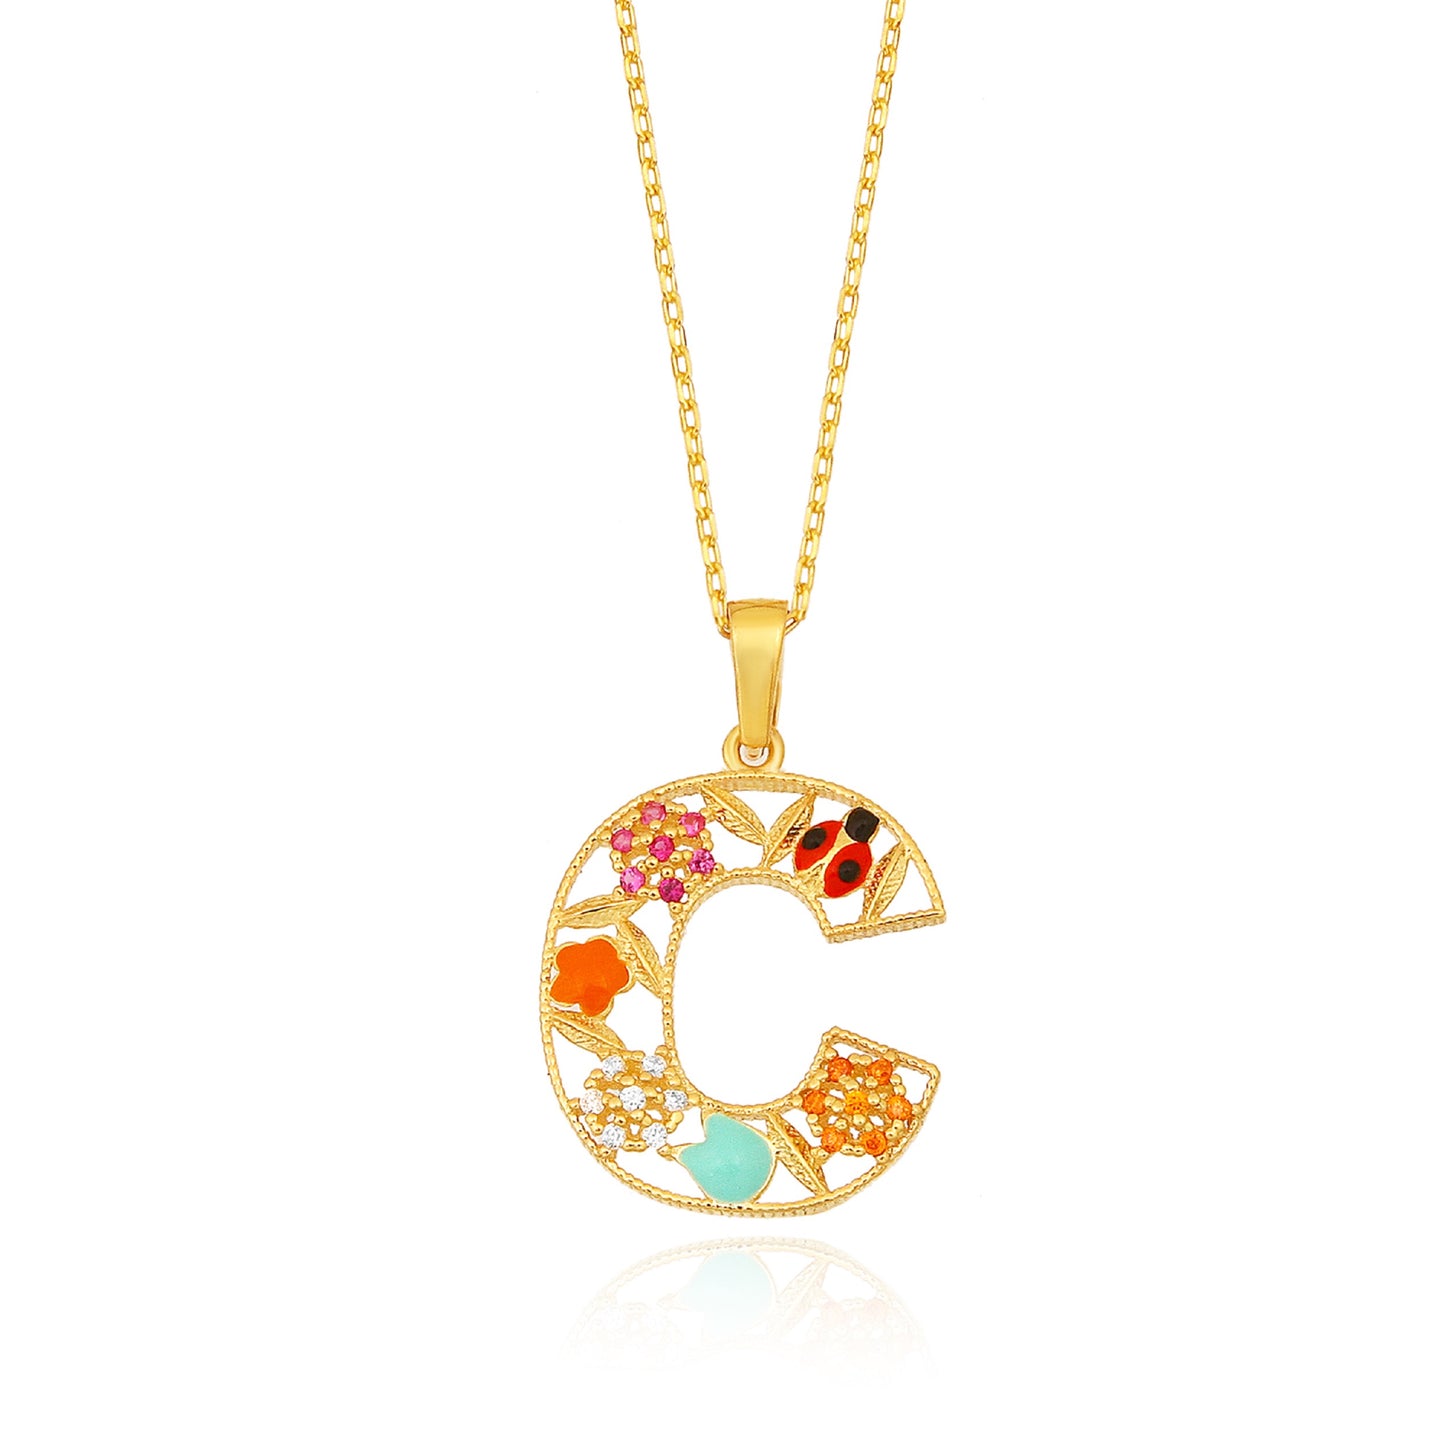 Floral "C" Letter Necklace with Ladybug Accent